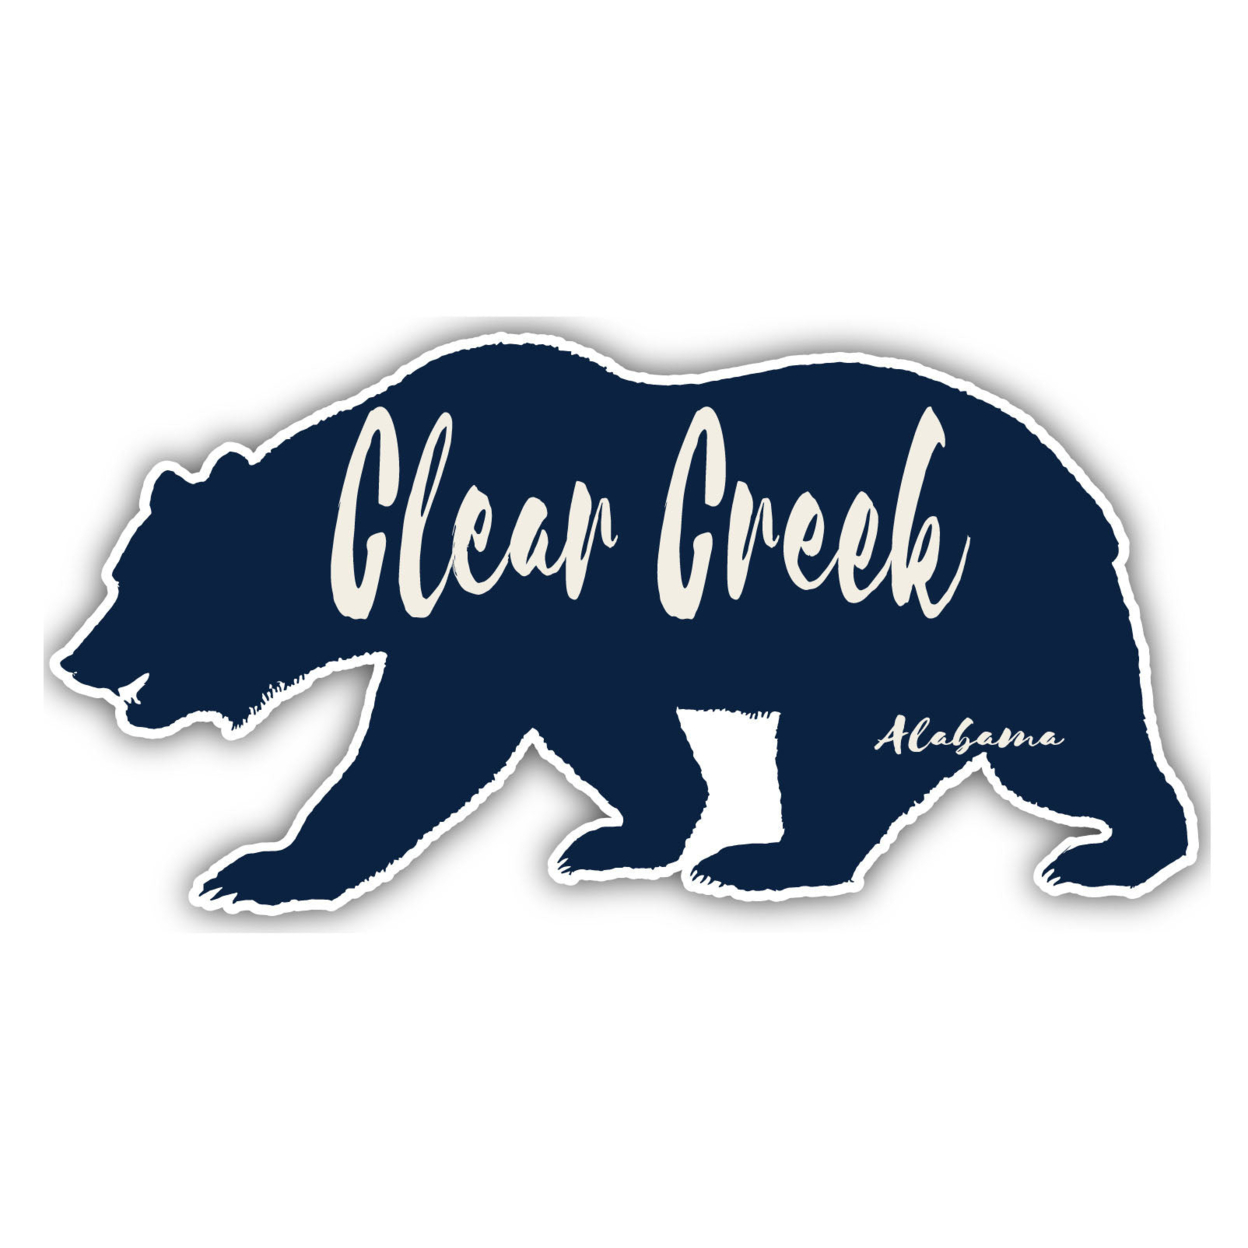 Clear Creek Alabama Souvenir Decorative Stickers (Choose Theme And Size) - 4-Pack, 4-Inch, Adventures Awaits